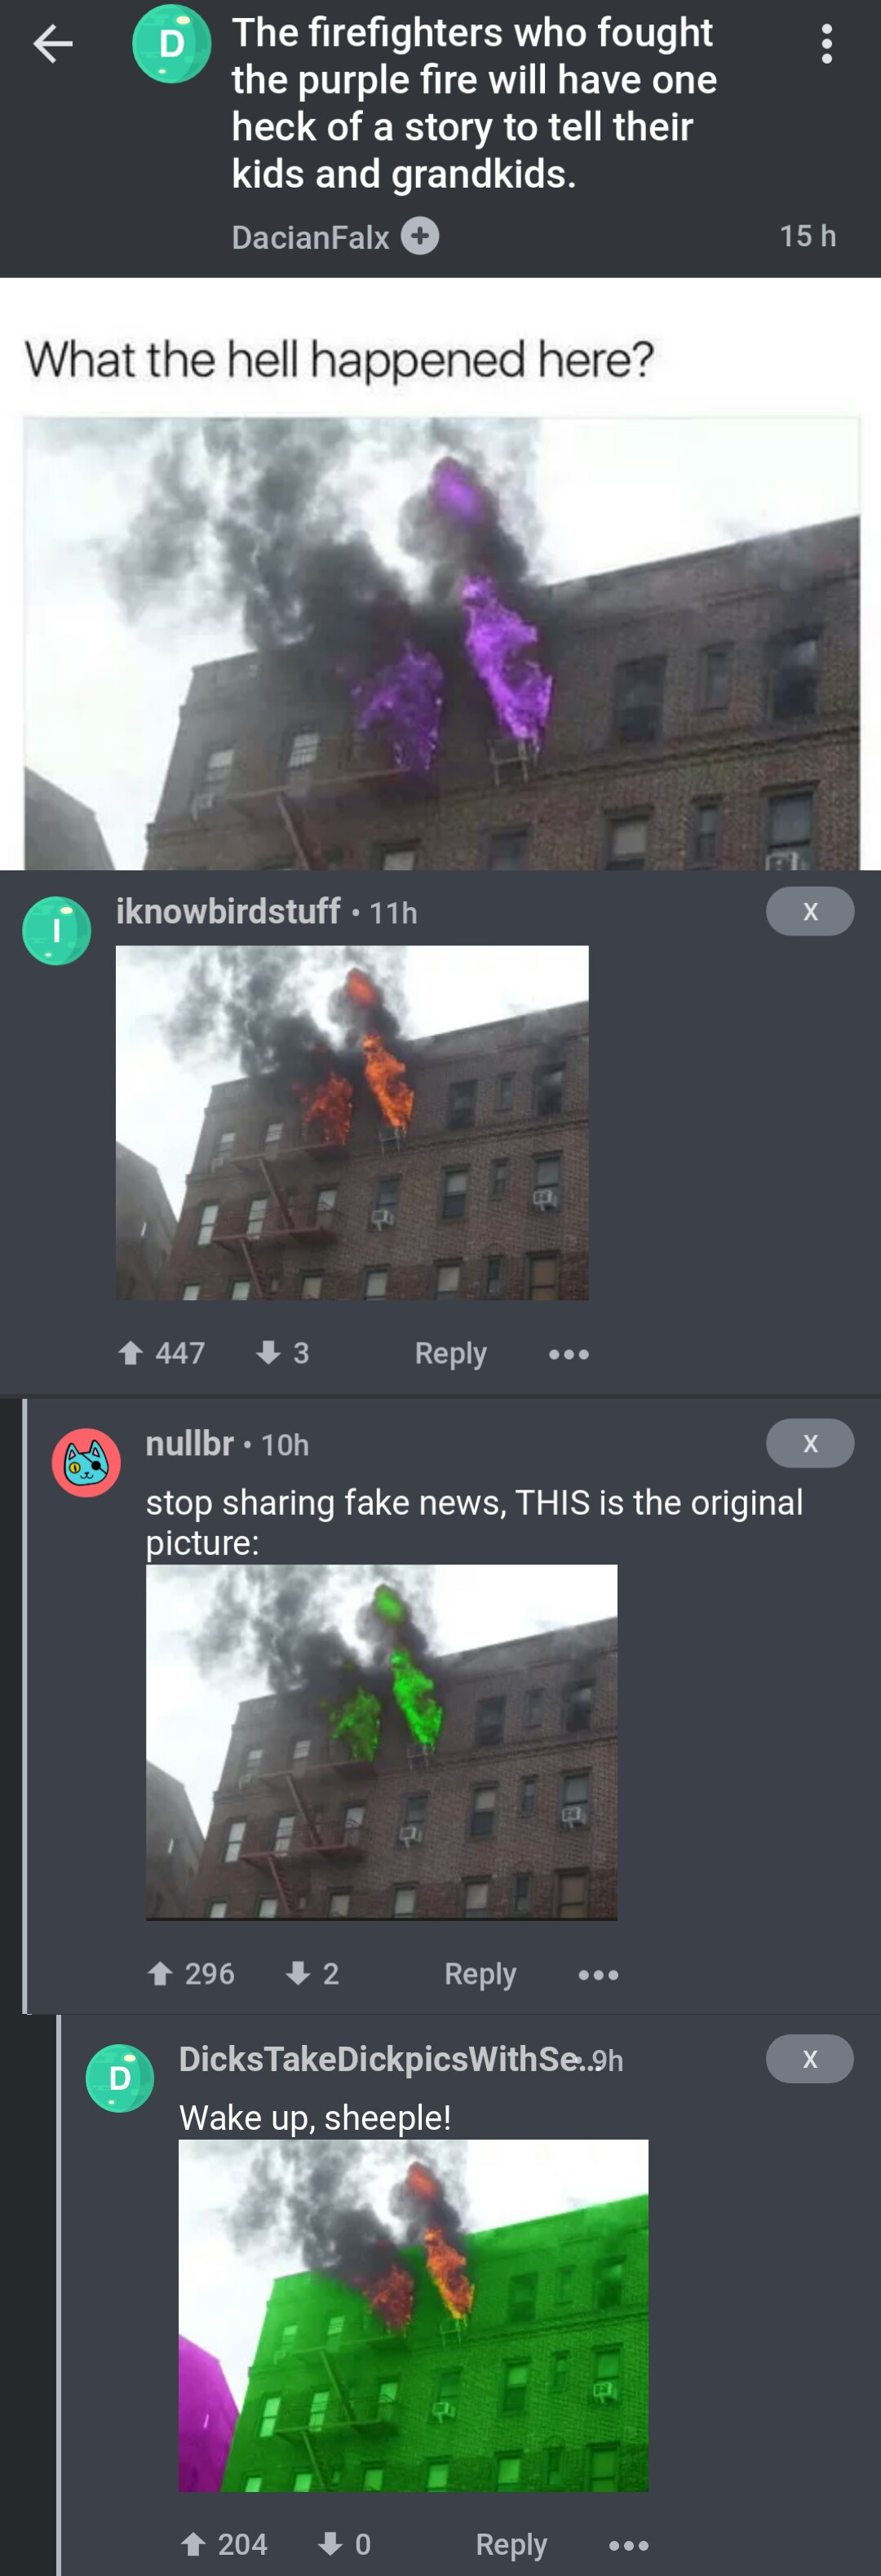 screenshot - The firefighters who fought the purple fire will have one heck of a story to tell their kids and grandkids. DacianFalx 15 h What the hell happened here? iknowbirdstuff 11h 1 447 13 ... X nullbr 10h stop sharing fake news, This is the original